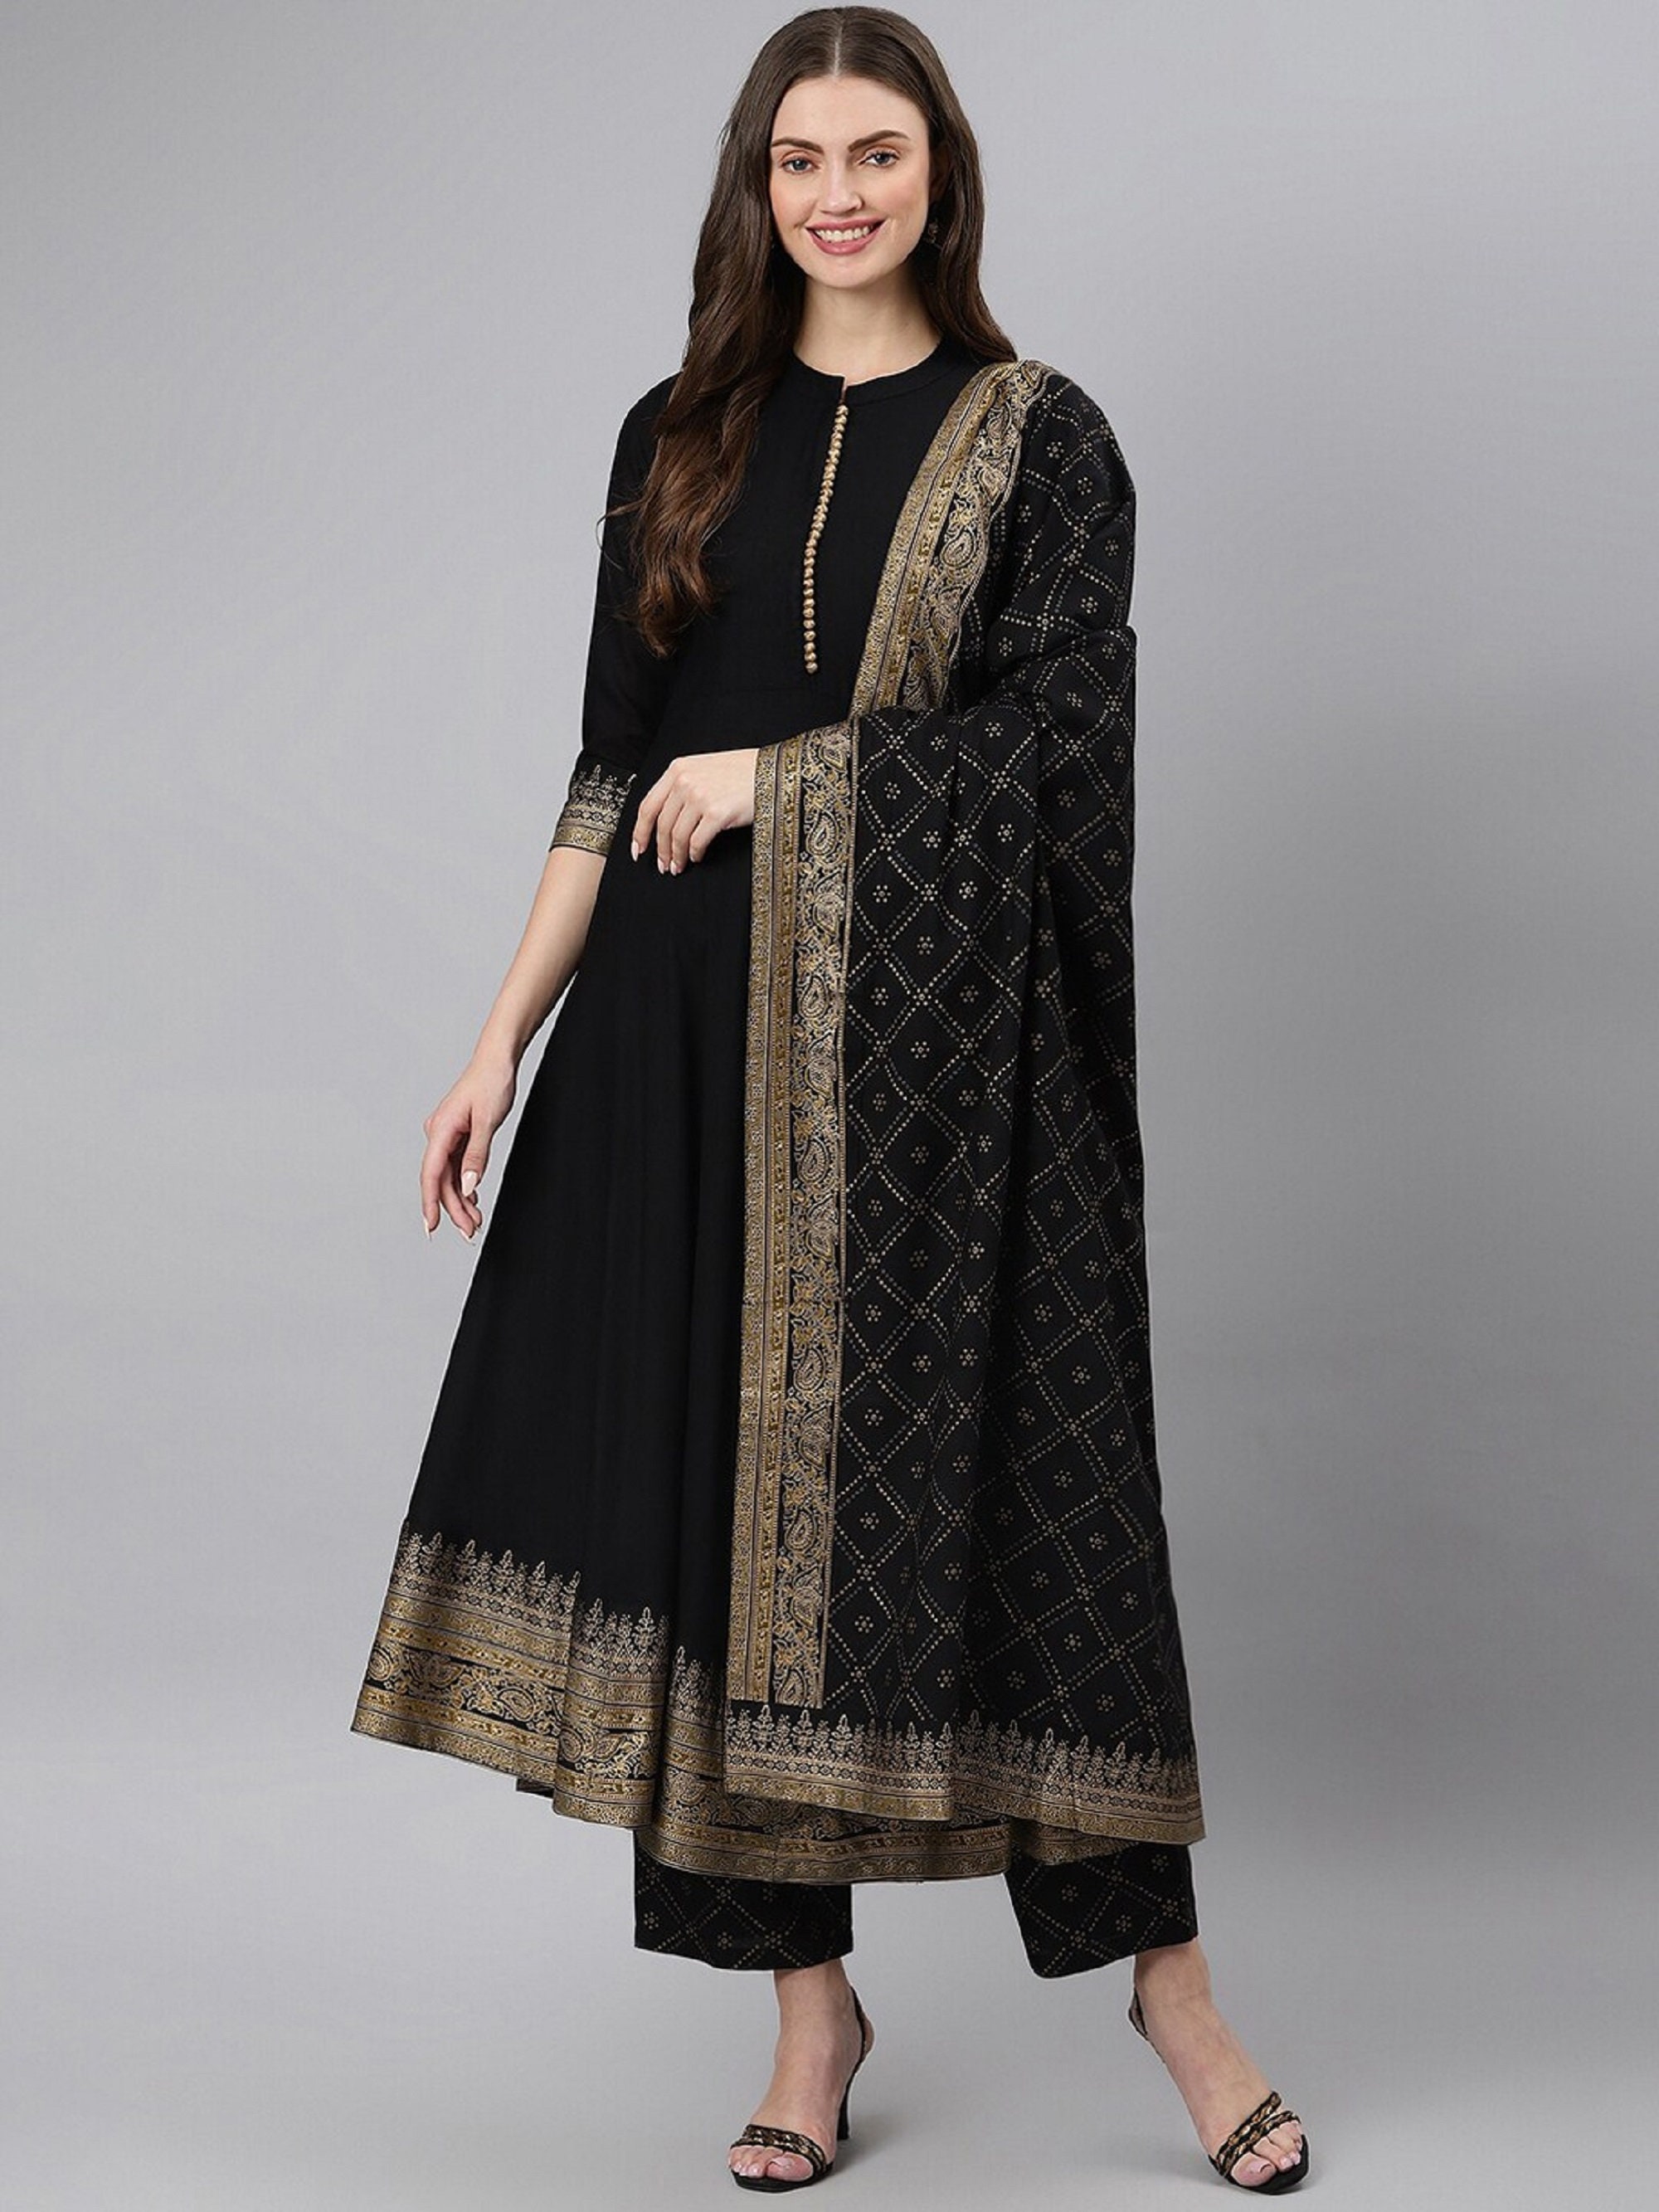 Black Color Georgette Fabric Admirable Readymade Gown